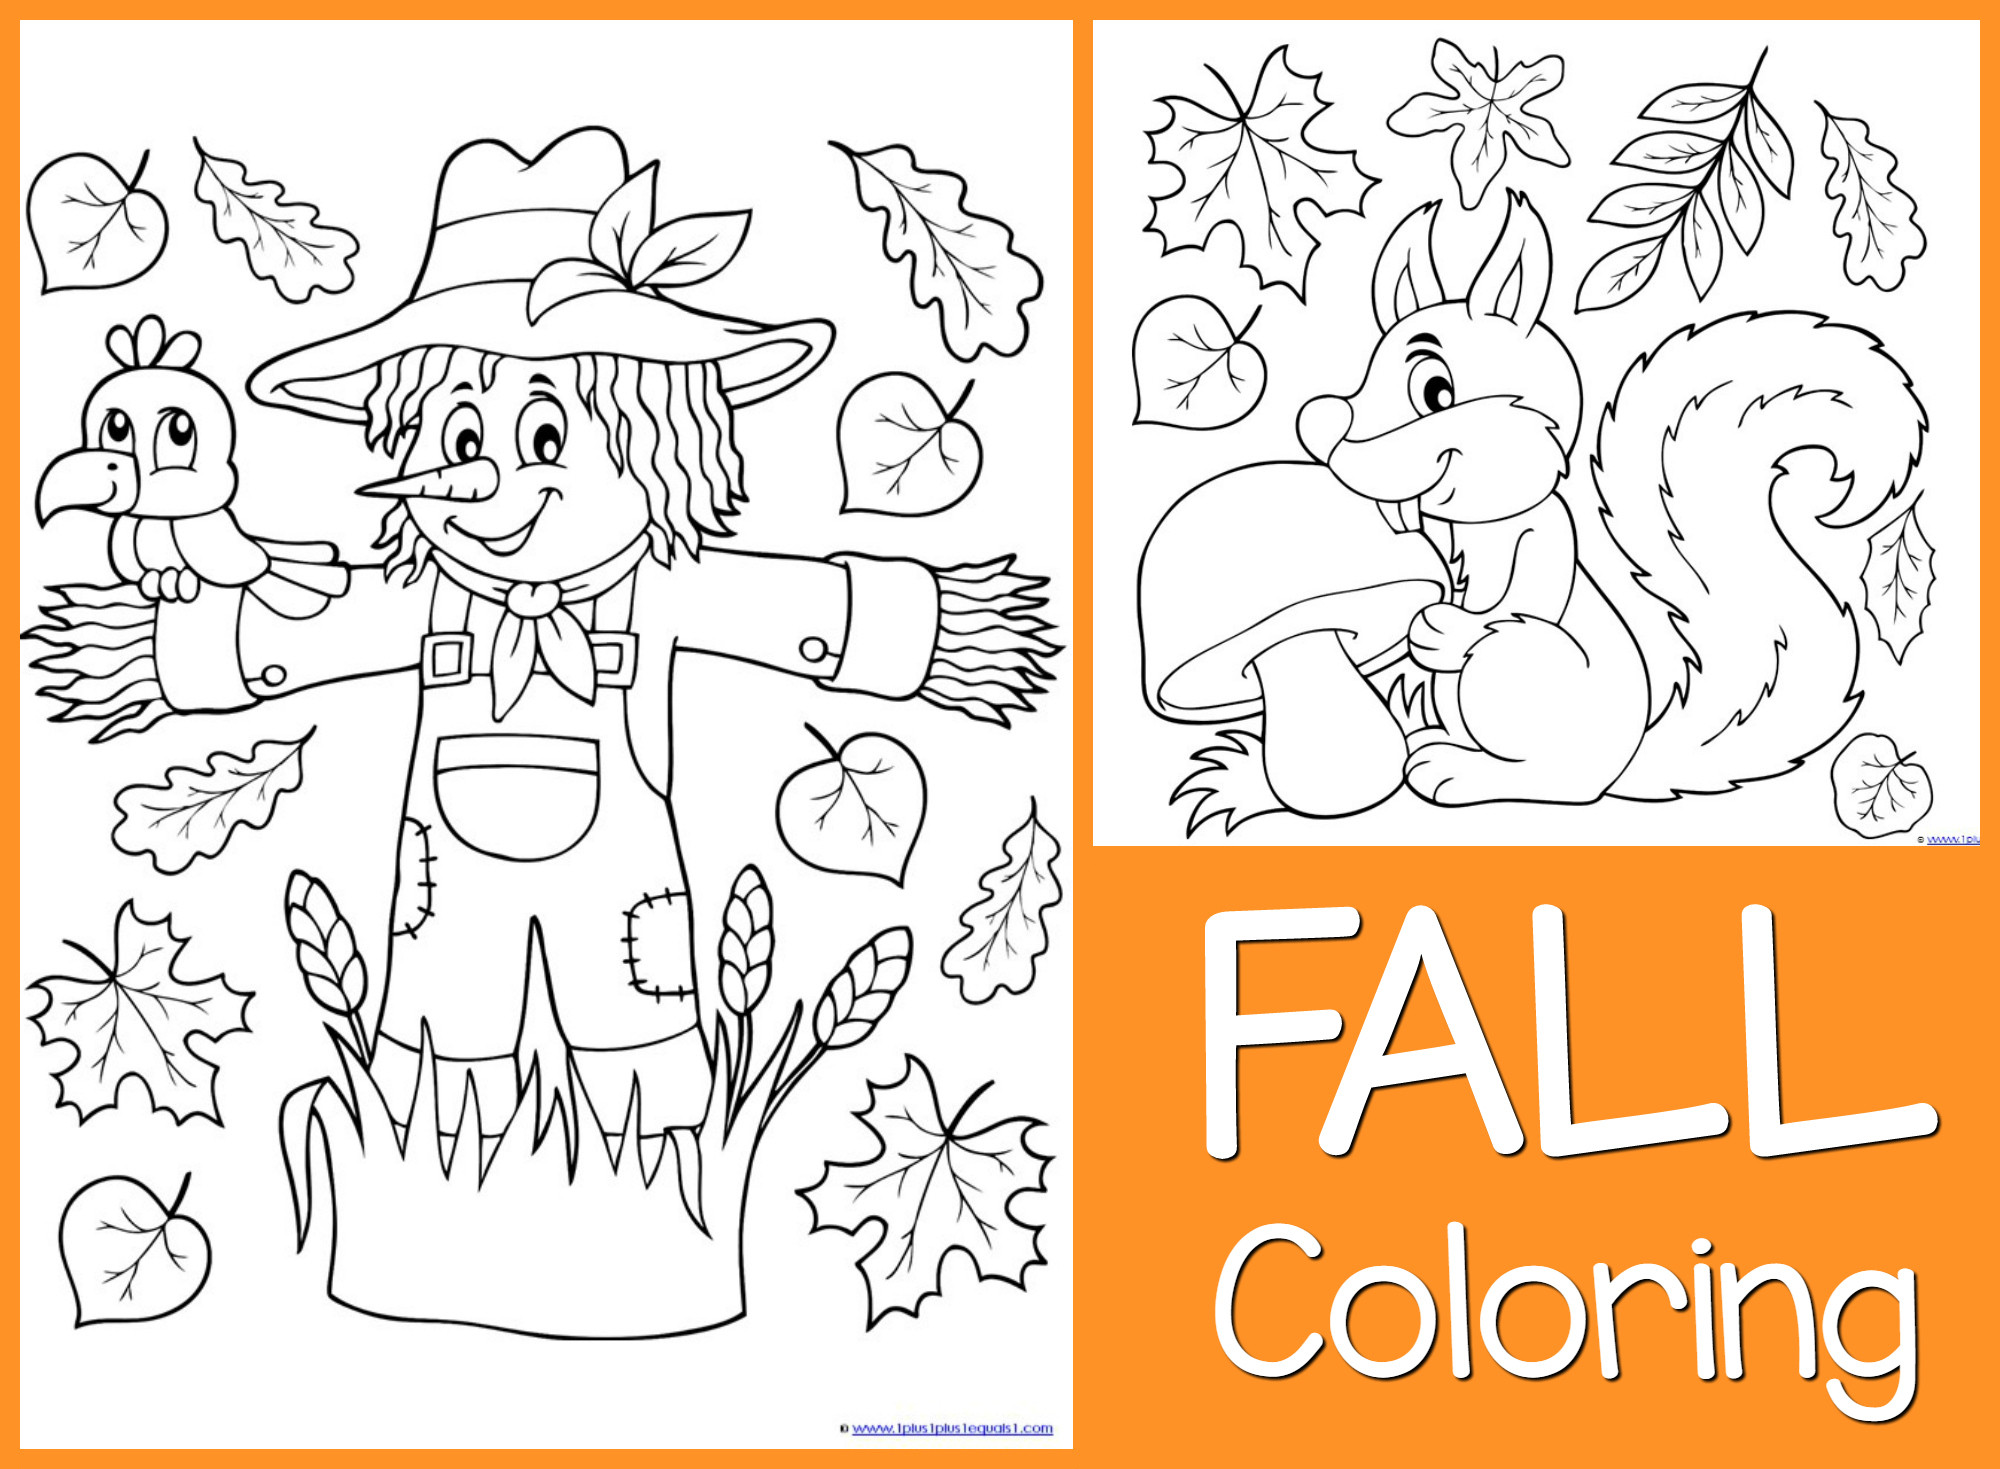 Free Printable Fall Coloring Sheets
 Just Color Free Coloring Printables